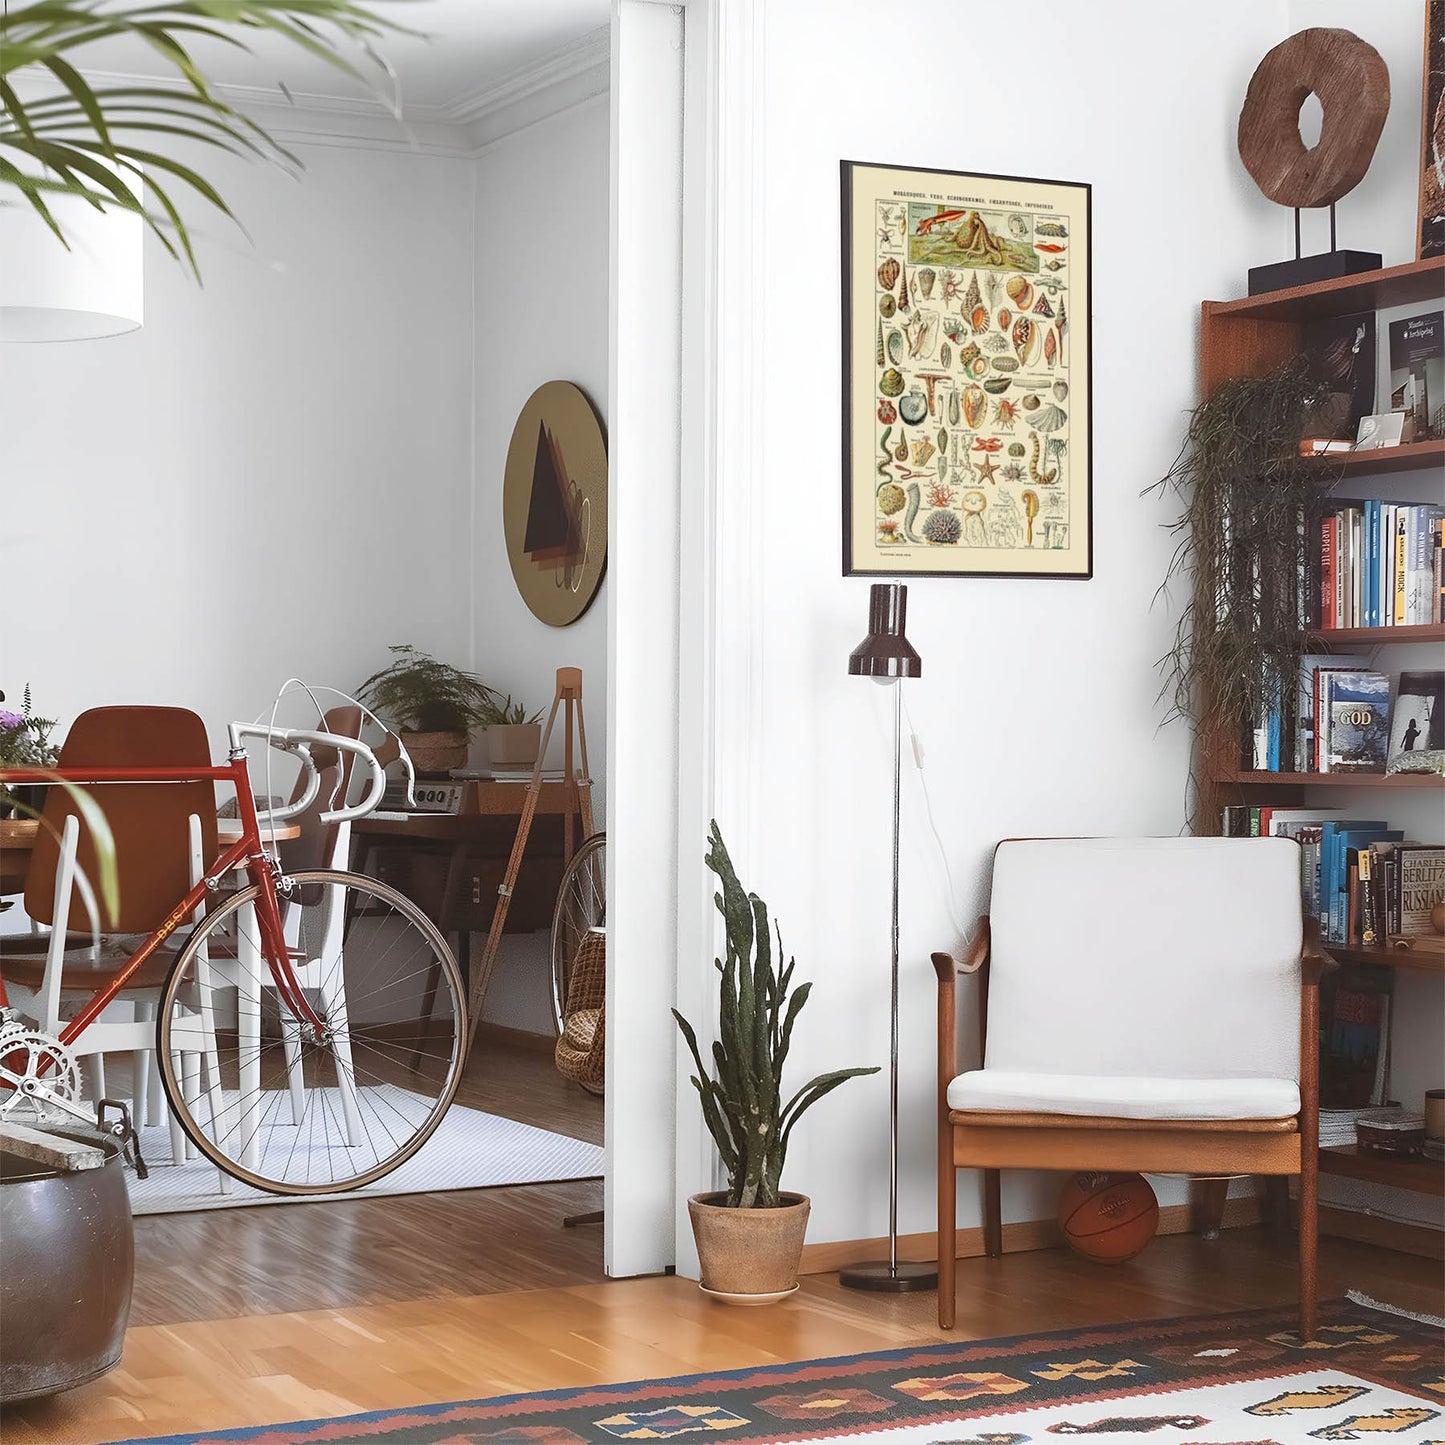 Eclectic living room with a road bike, bookshelf and house plants that features framed artwork of a Nautical above a chair and lamp